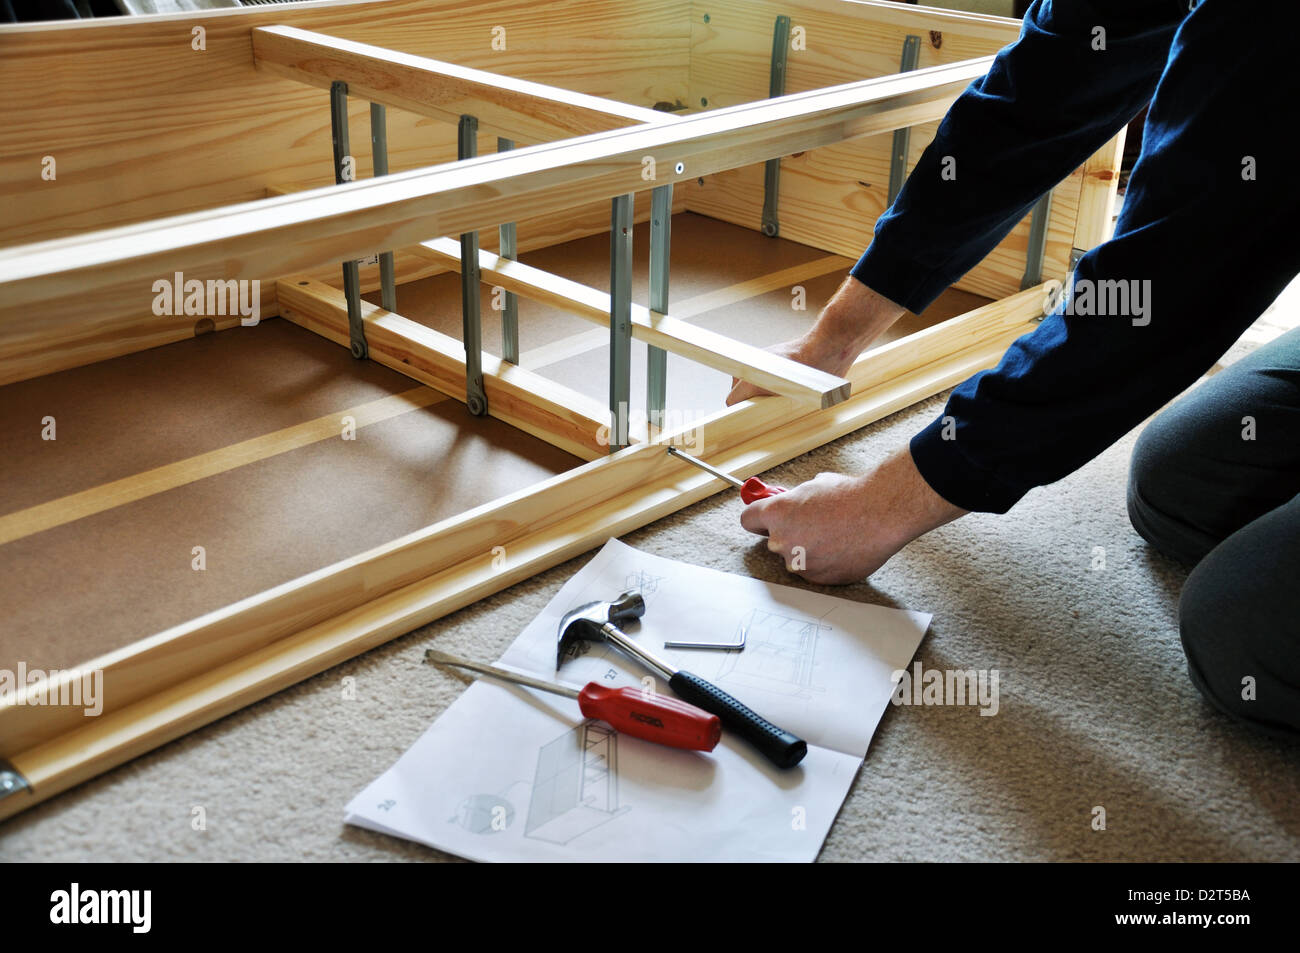 Man Assembling Piece Of Furniture From Ikea Store Stock Photo